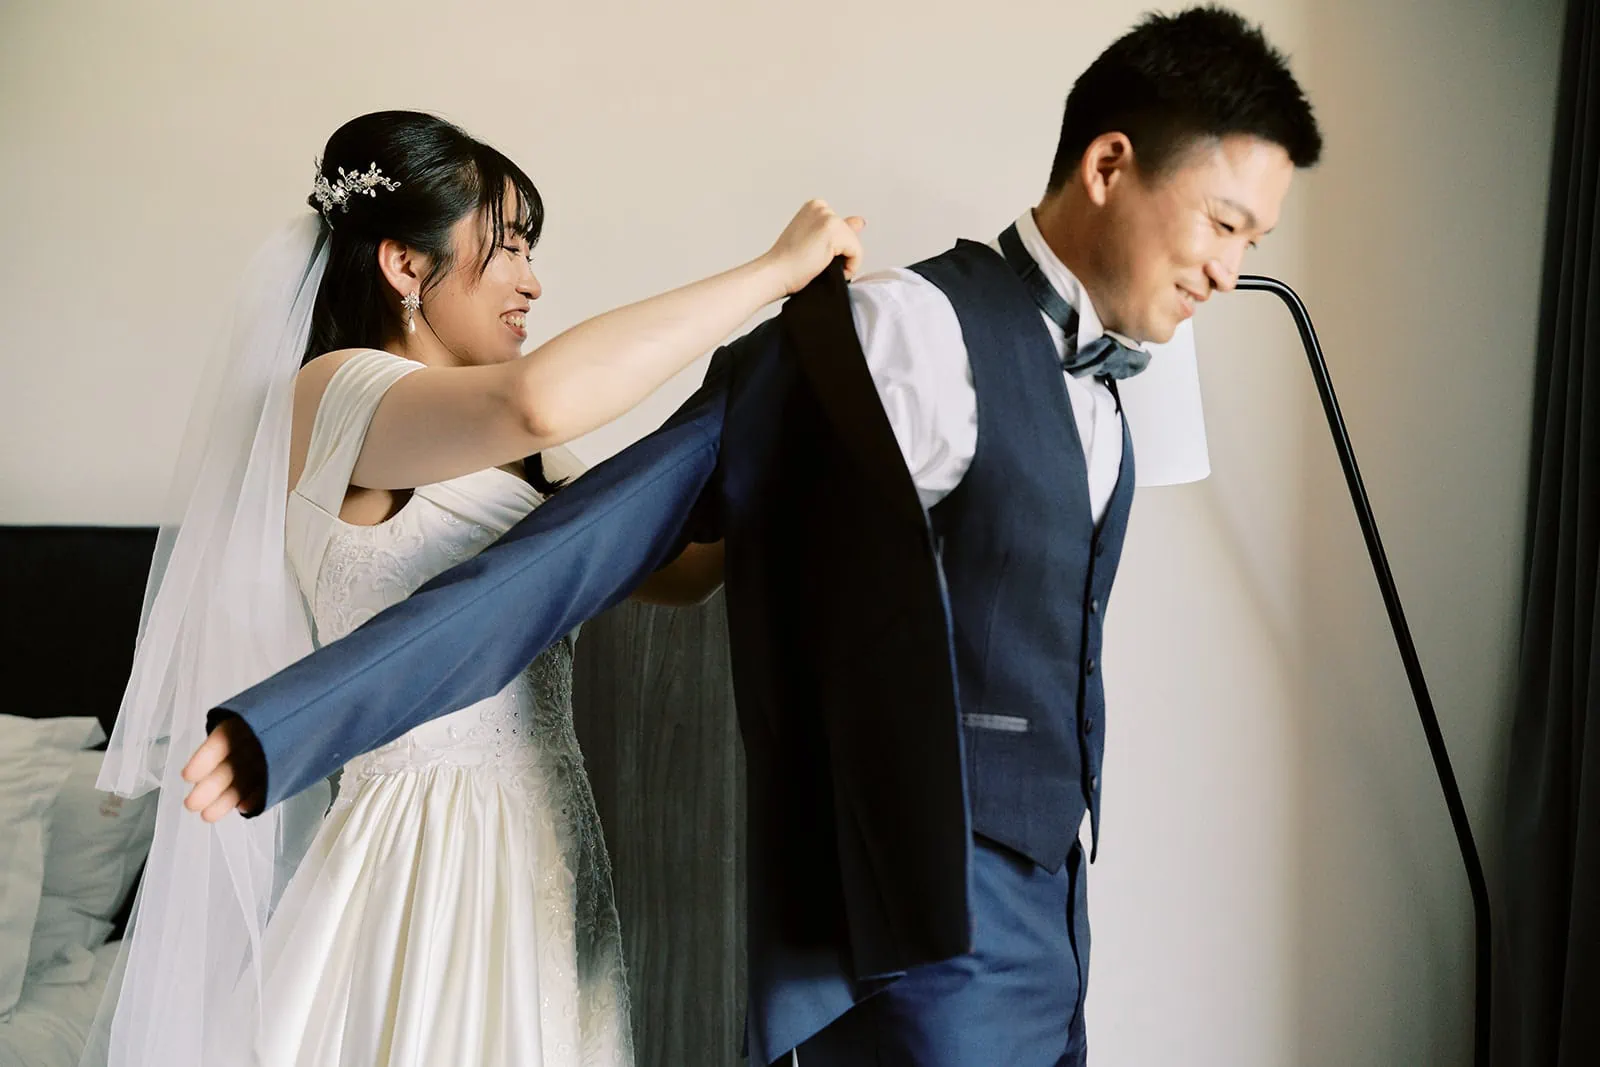 Queenstown Elopement Heli Wedding Photographer クイーンズタウン結婚式 | Ayaka and Yuki, the bride and groom, getting ready for their Queenstown pre-wedding photoshoot in a hotel room.